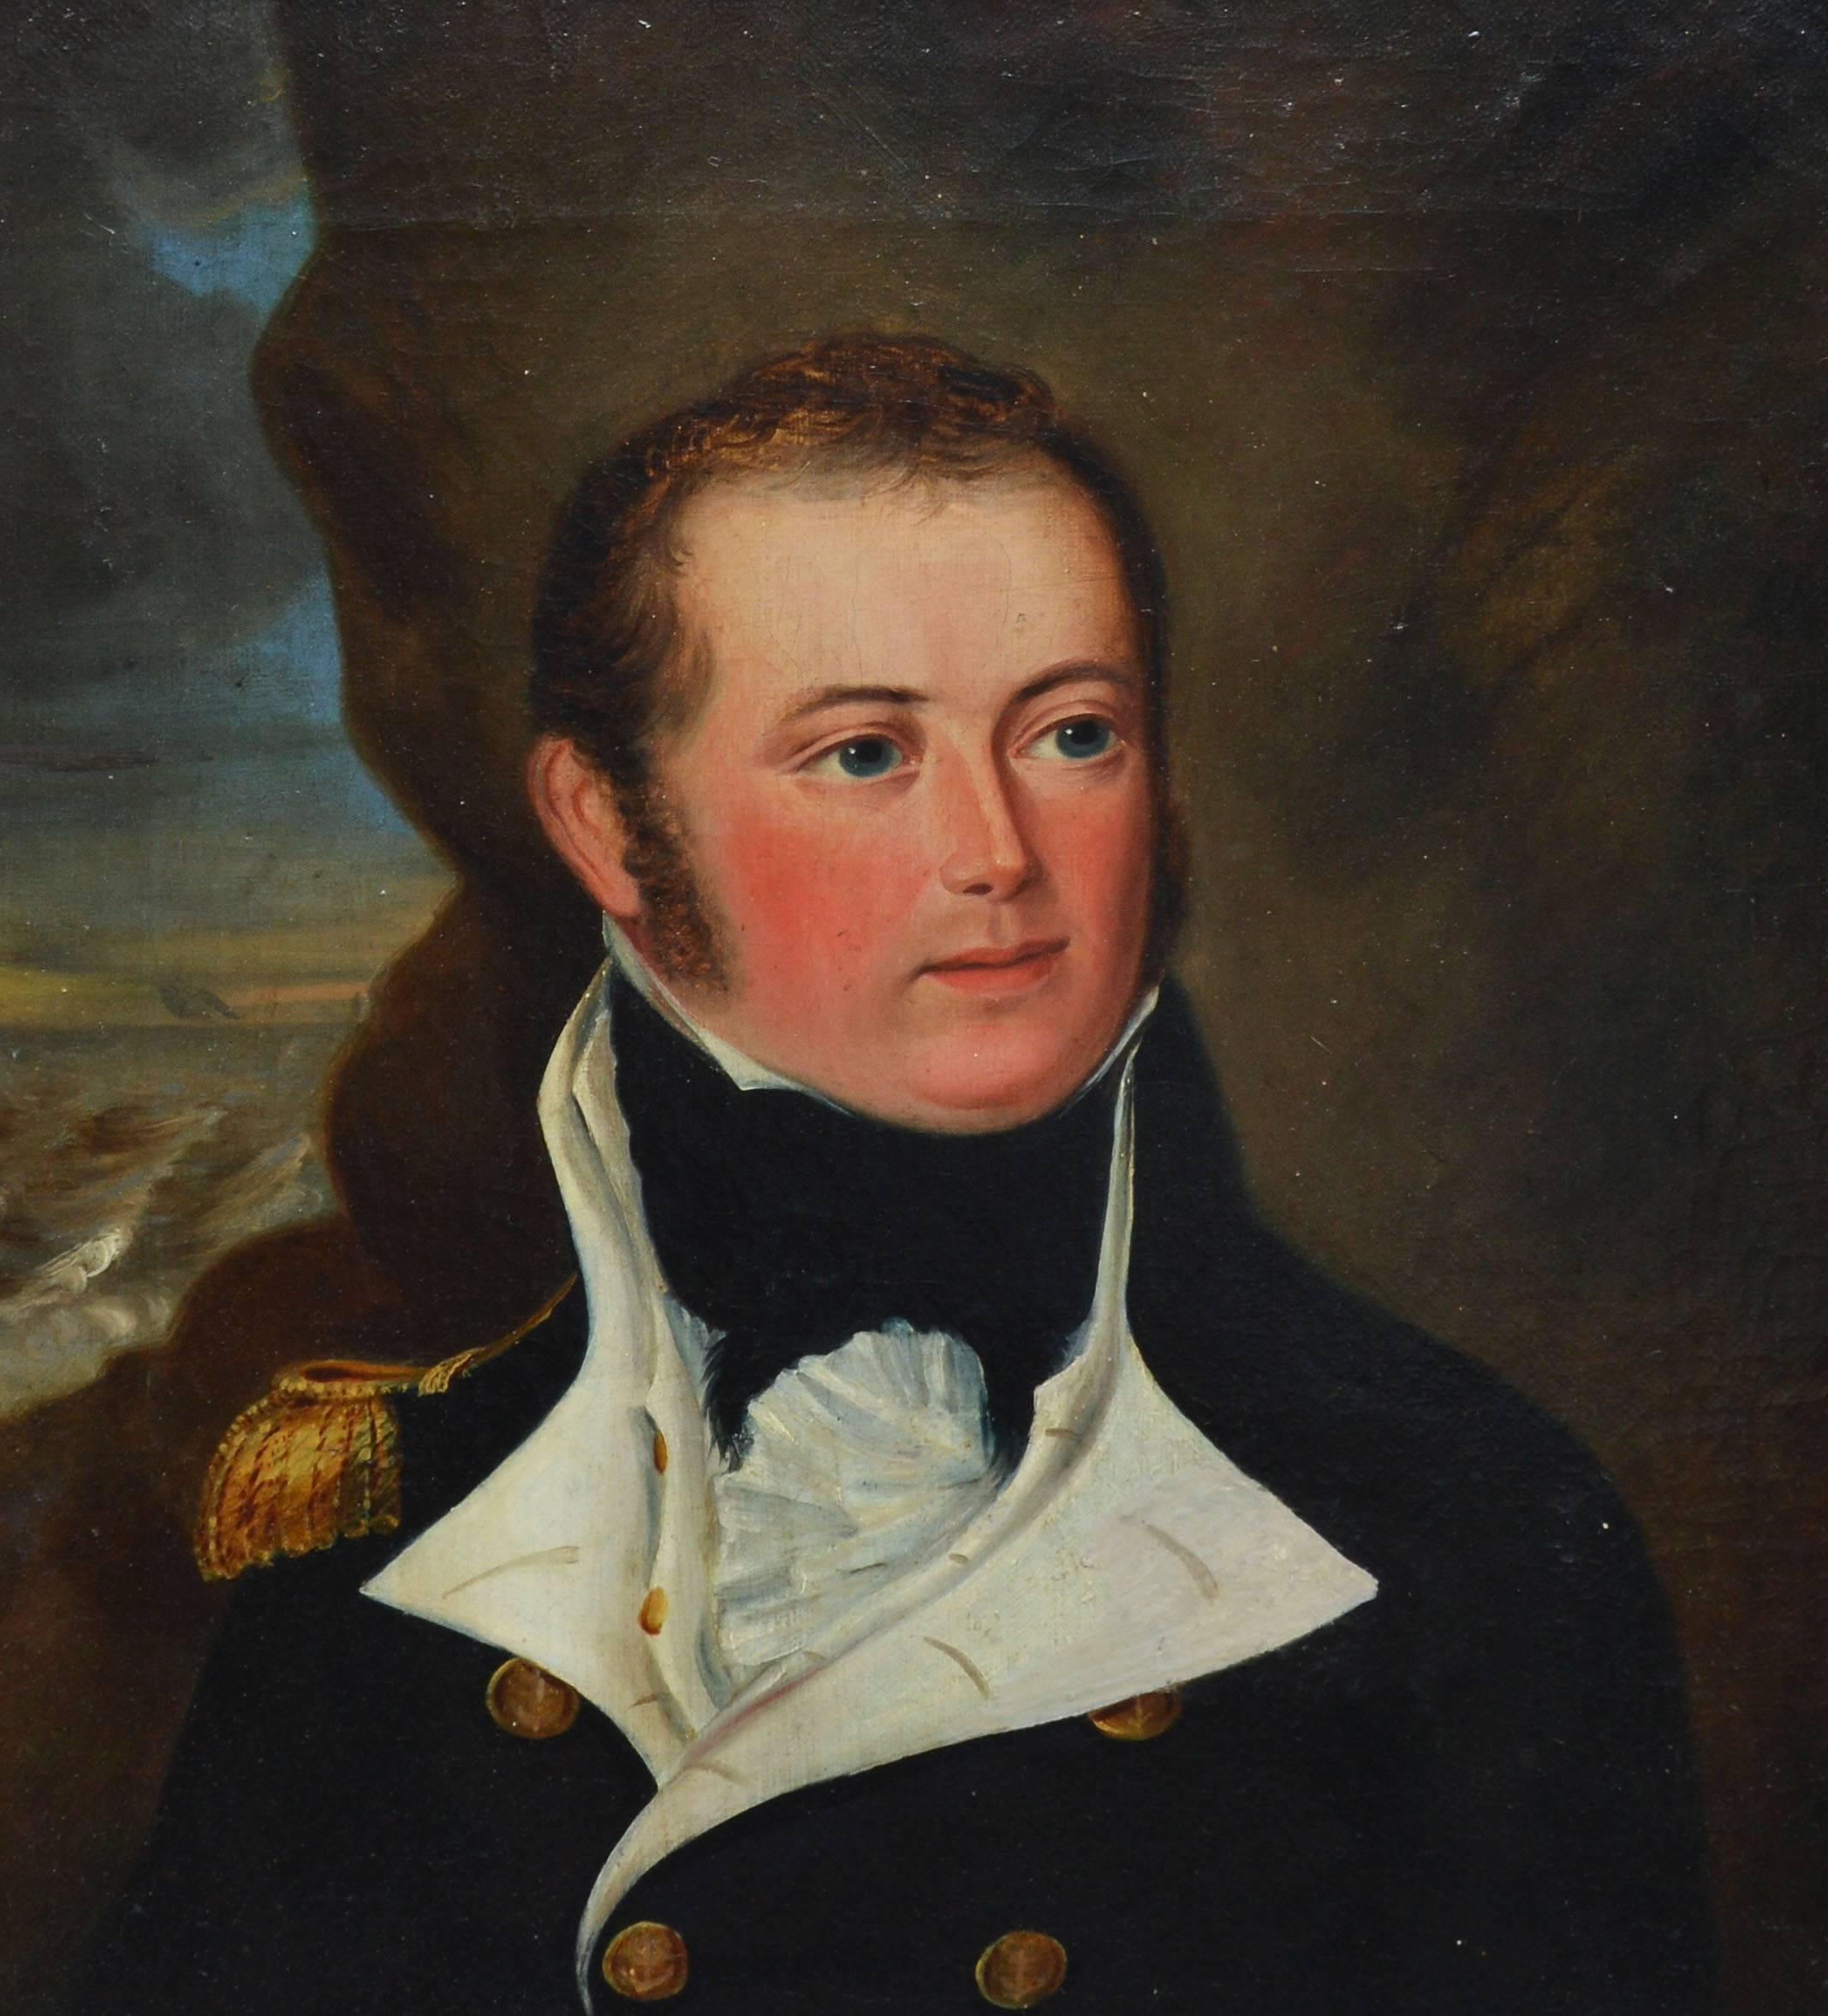 Portrait of a Military Officer - Brown Portrait Painting by Unknown